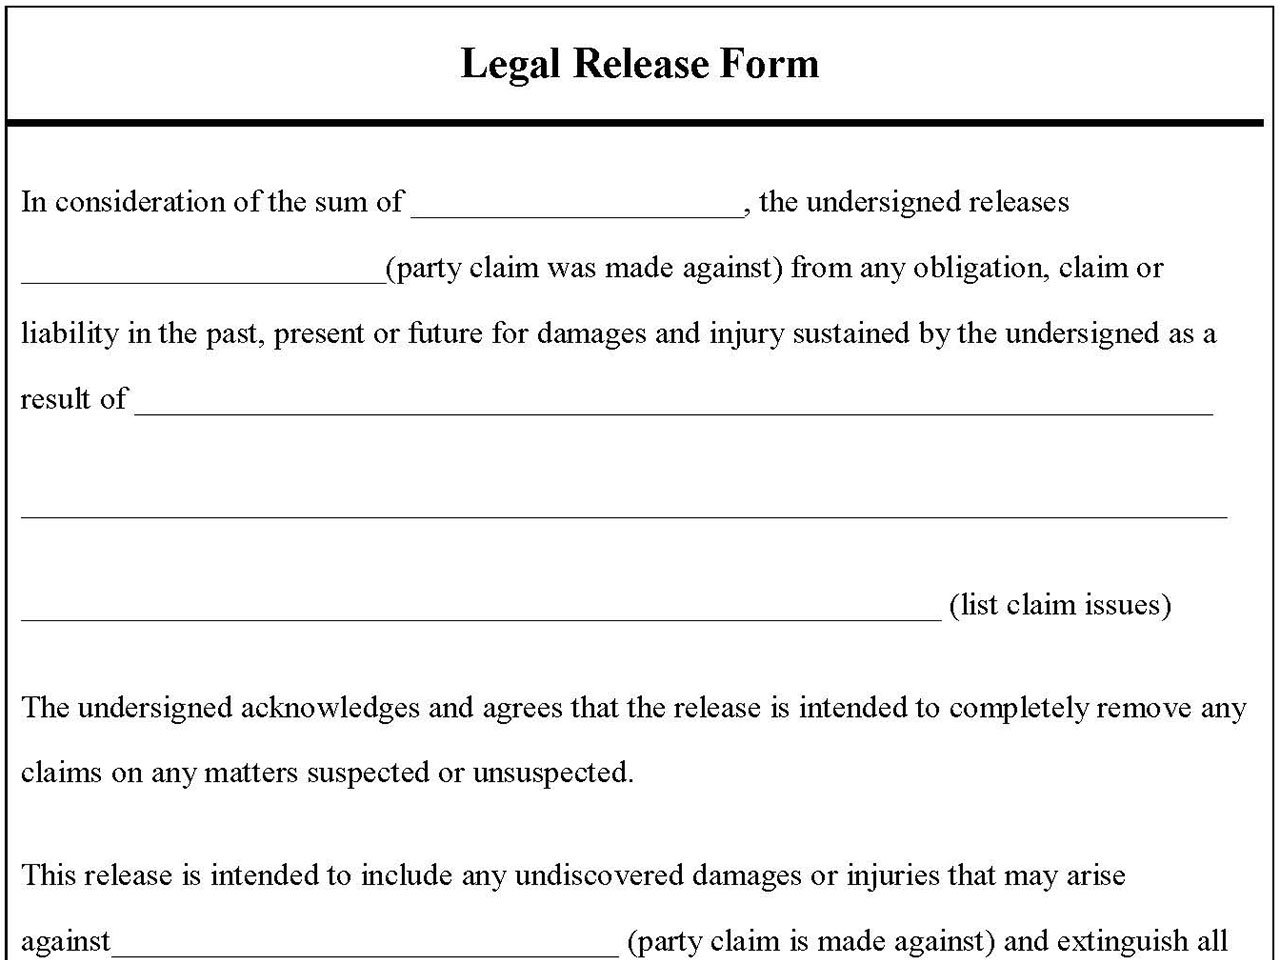 Legal Release Form